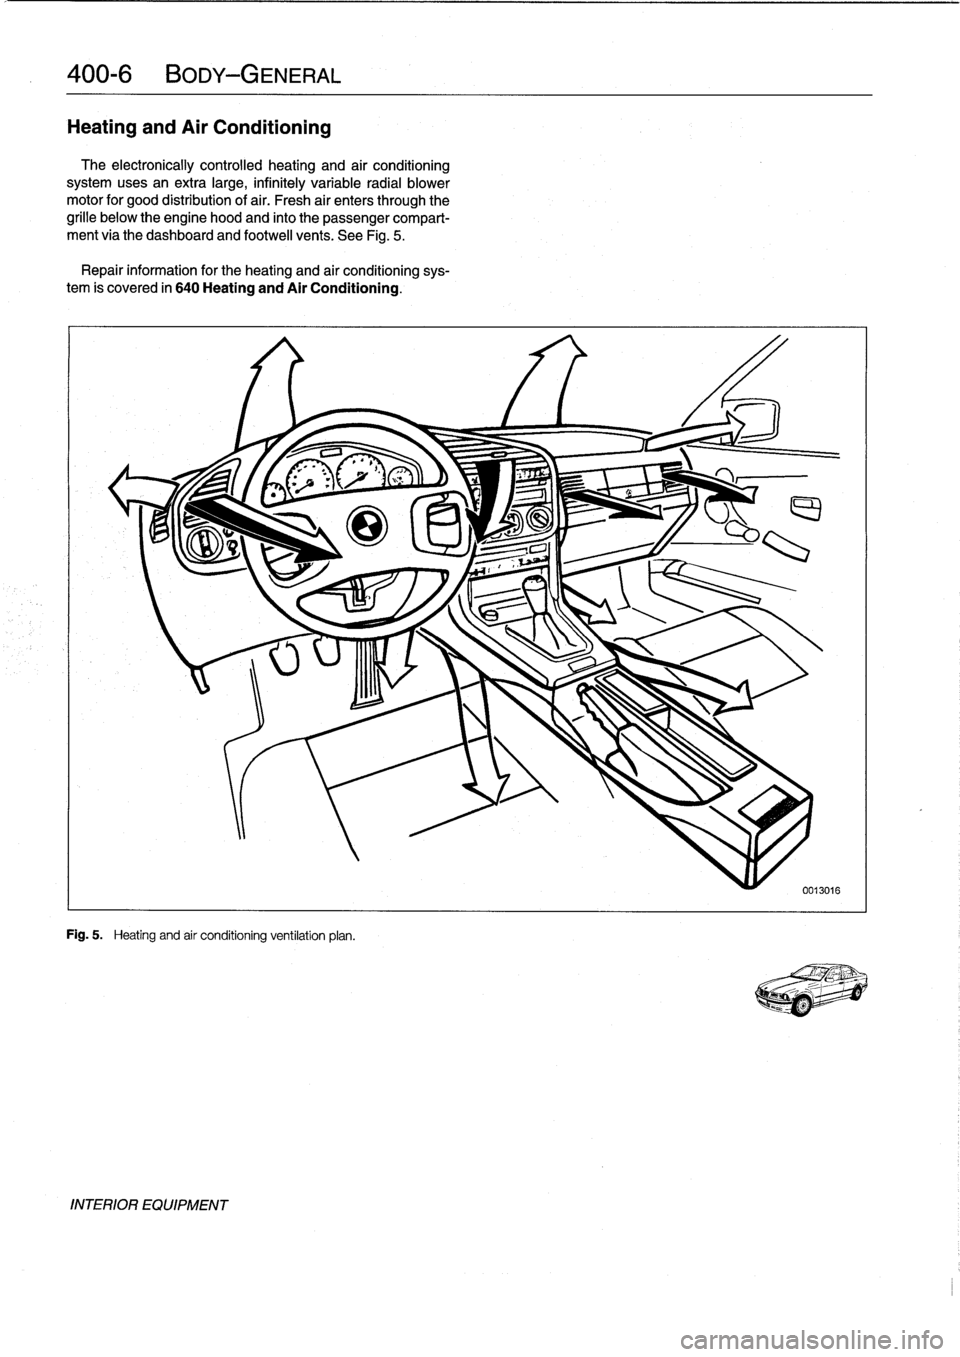 BMW 328i 1994 E36 User Guide 
400-
6
BODY-GENERAL

Heating
and
Air
Conditioning

The
electronically
controlled
heating
and
air
conditioning

systemusesan
extra
large,
infinitely
variable
radial
blower
motor
for
good
distribution
